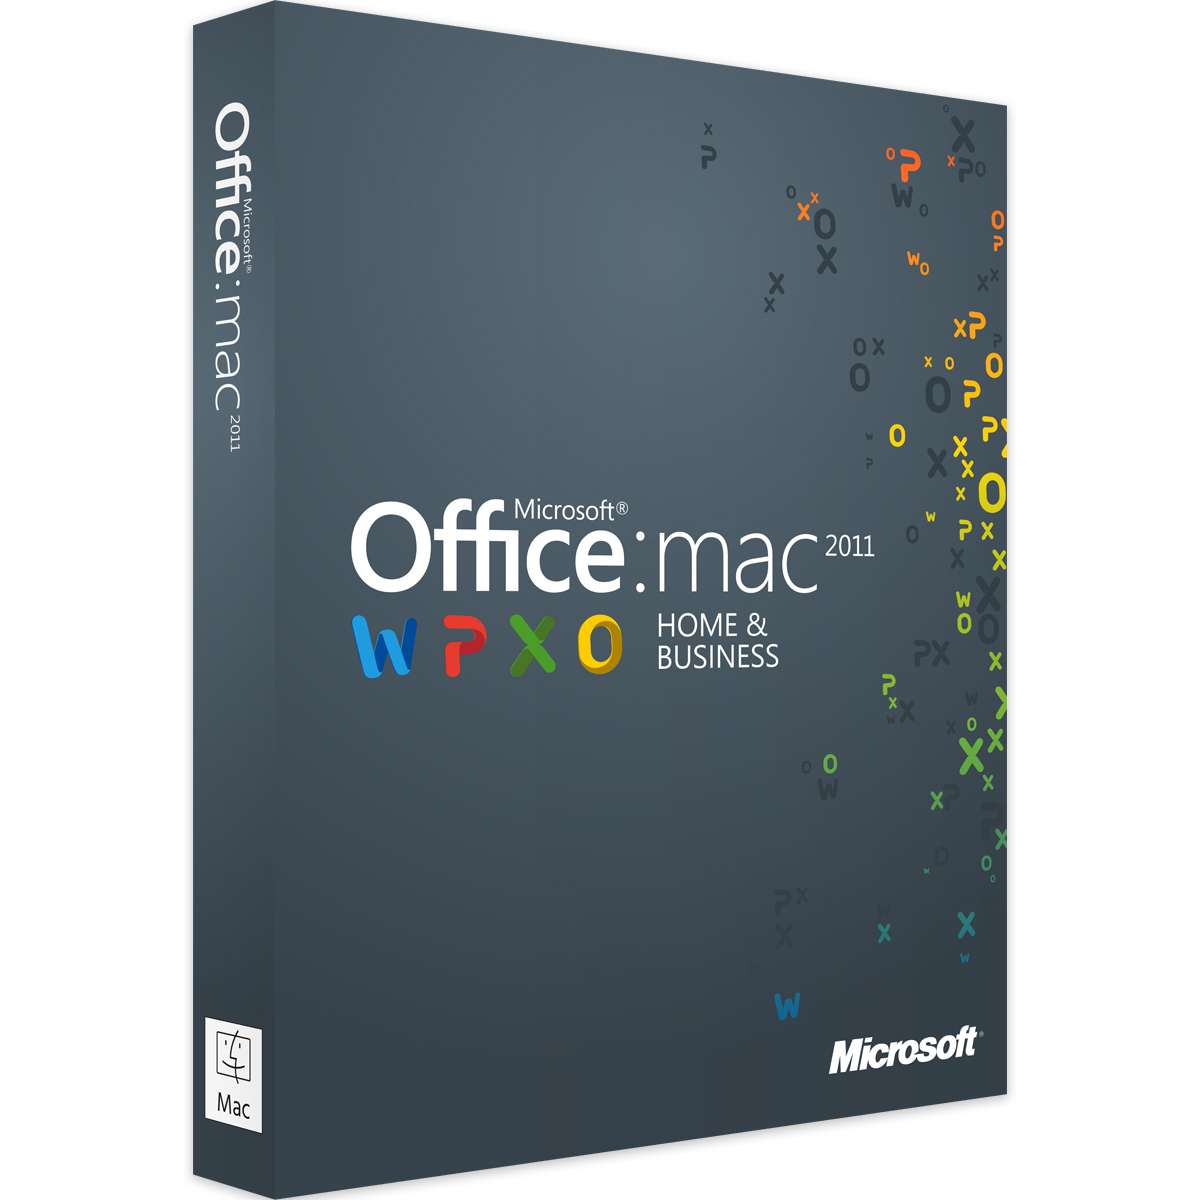 purchase office for mac 2011